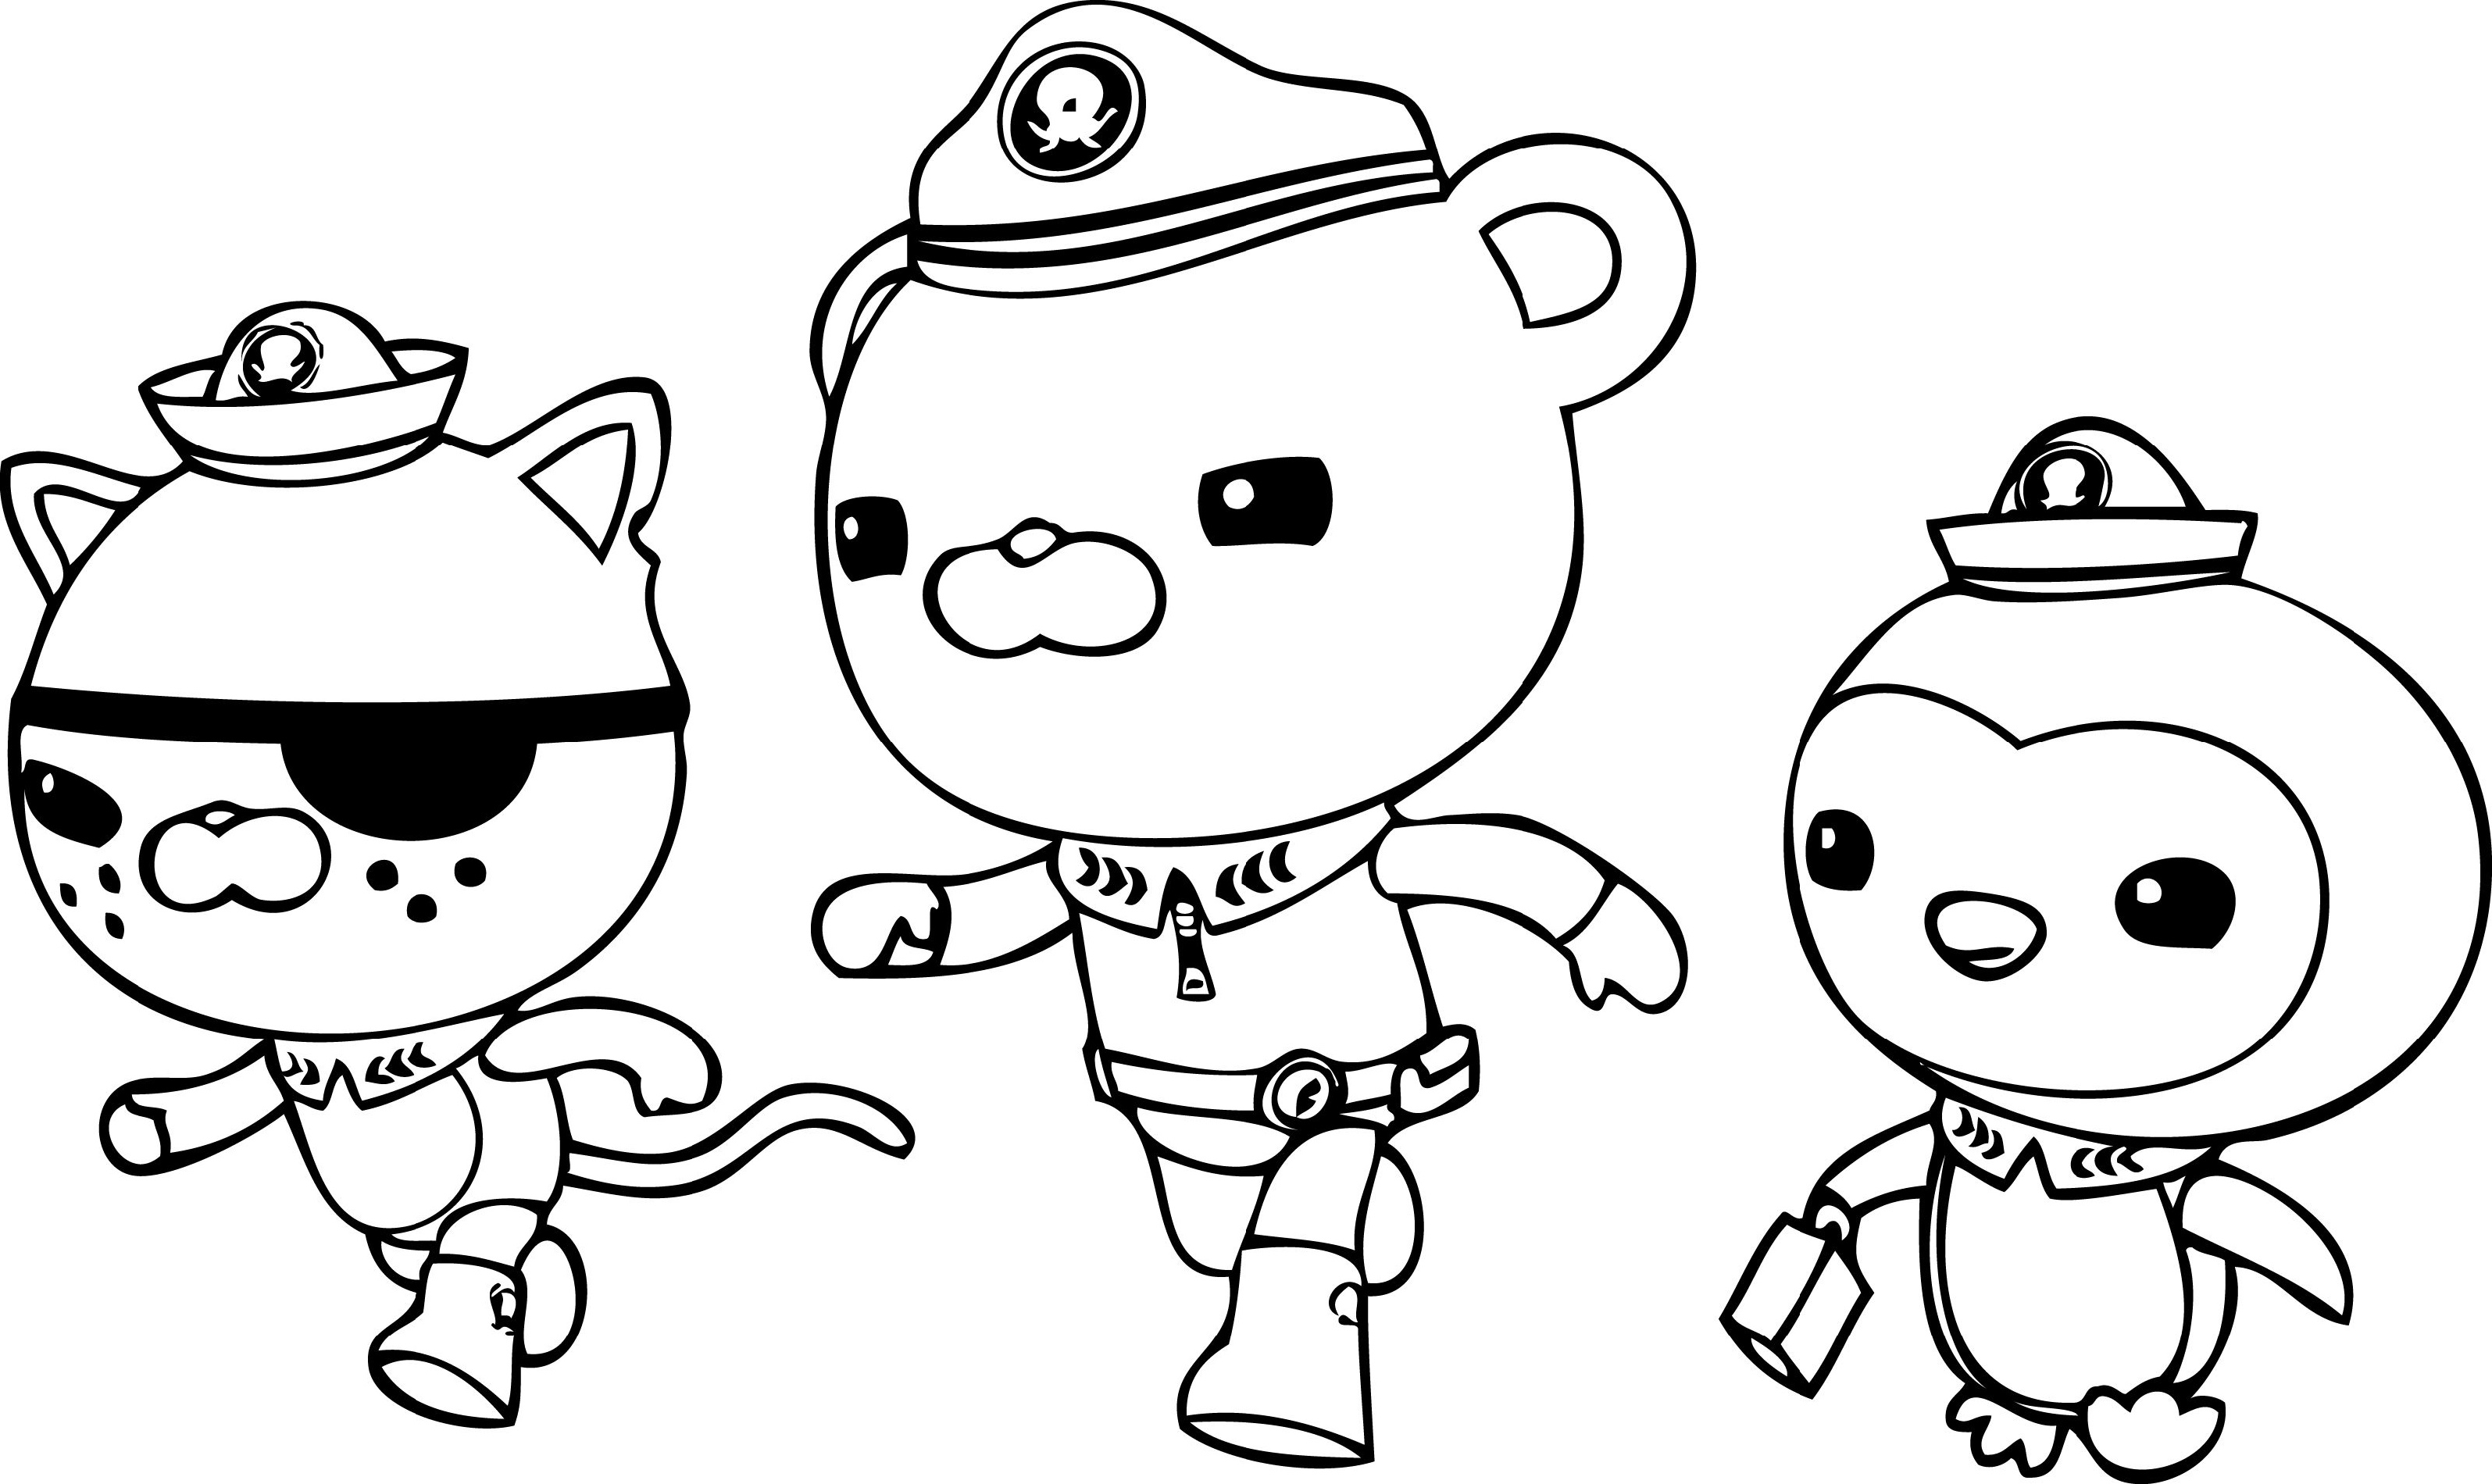 Octonauts Coloring Pages Printable Octonauts Coloring Pages For Kids K5 Worksheets